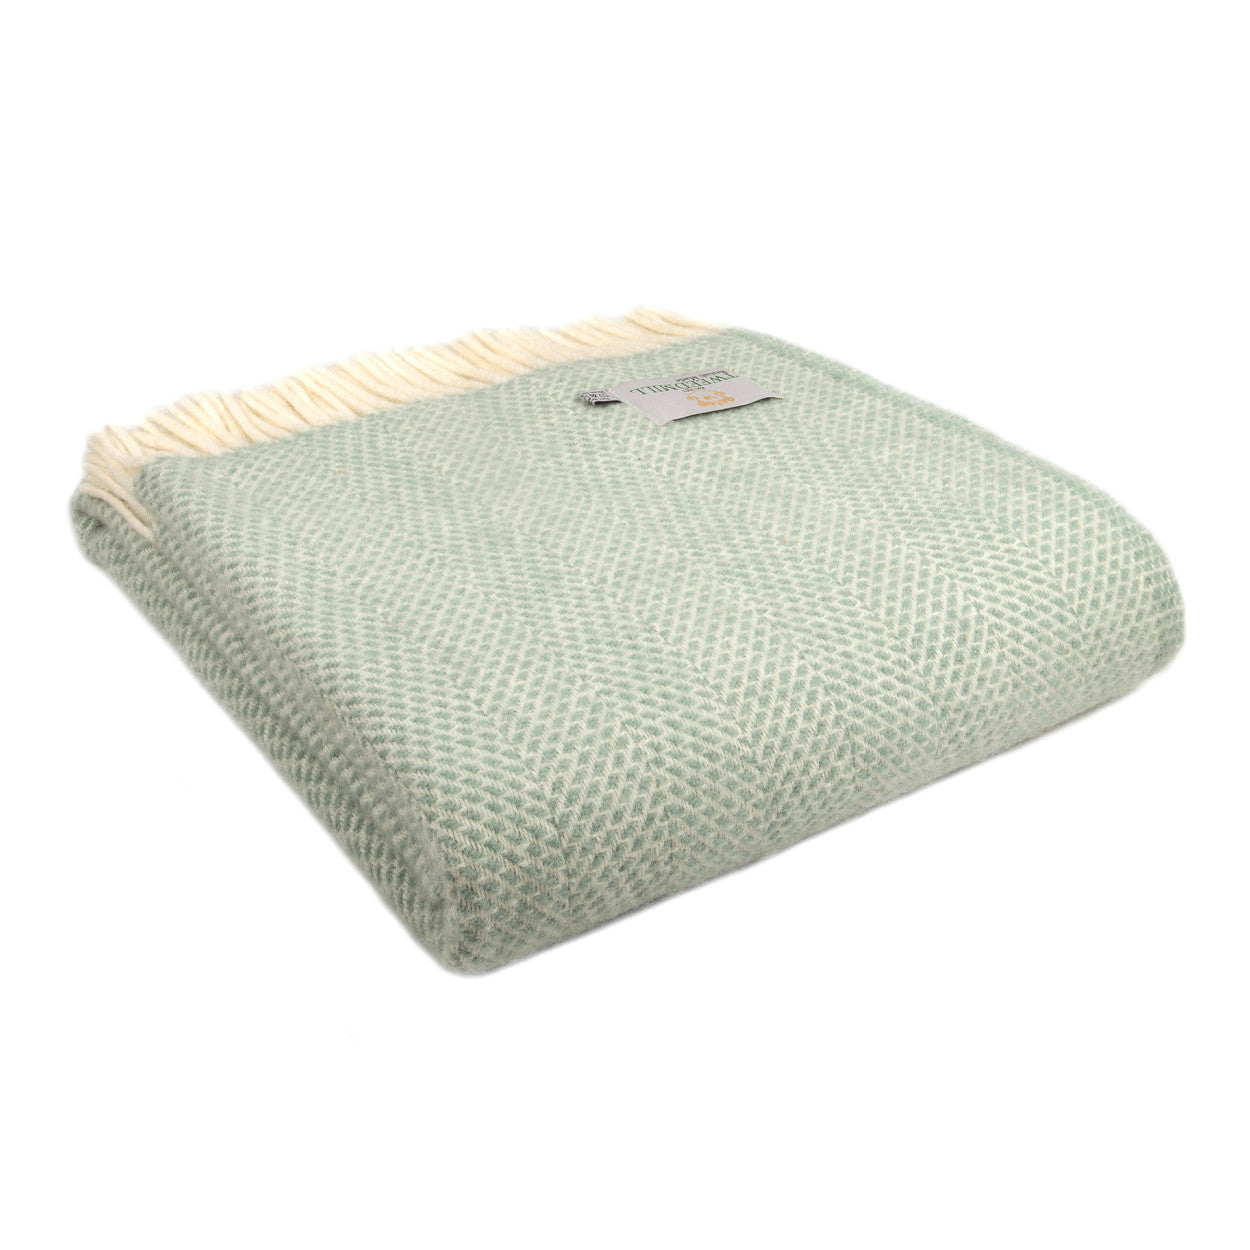 Beehive Large Throws - Pure New Wool Made in the UK by Tweedmill